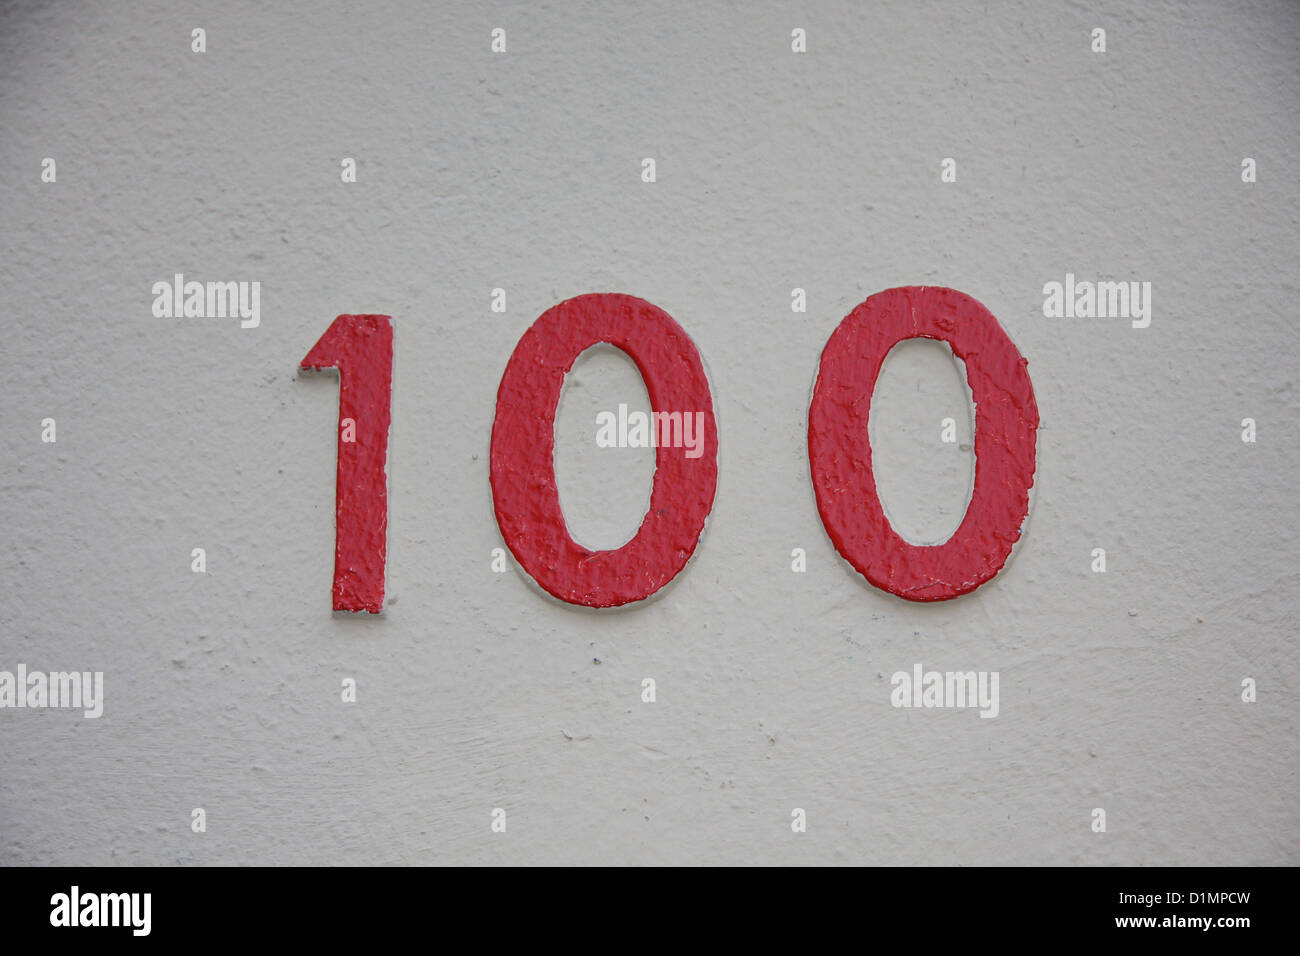 100 High Resolution Stock Photography and Images - Alamy